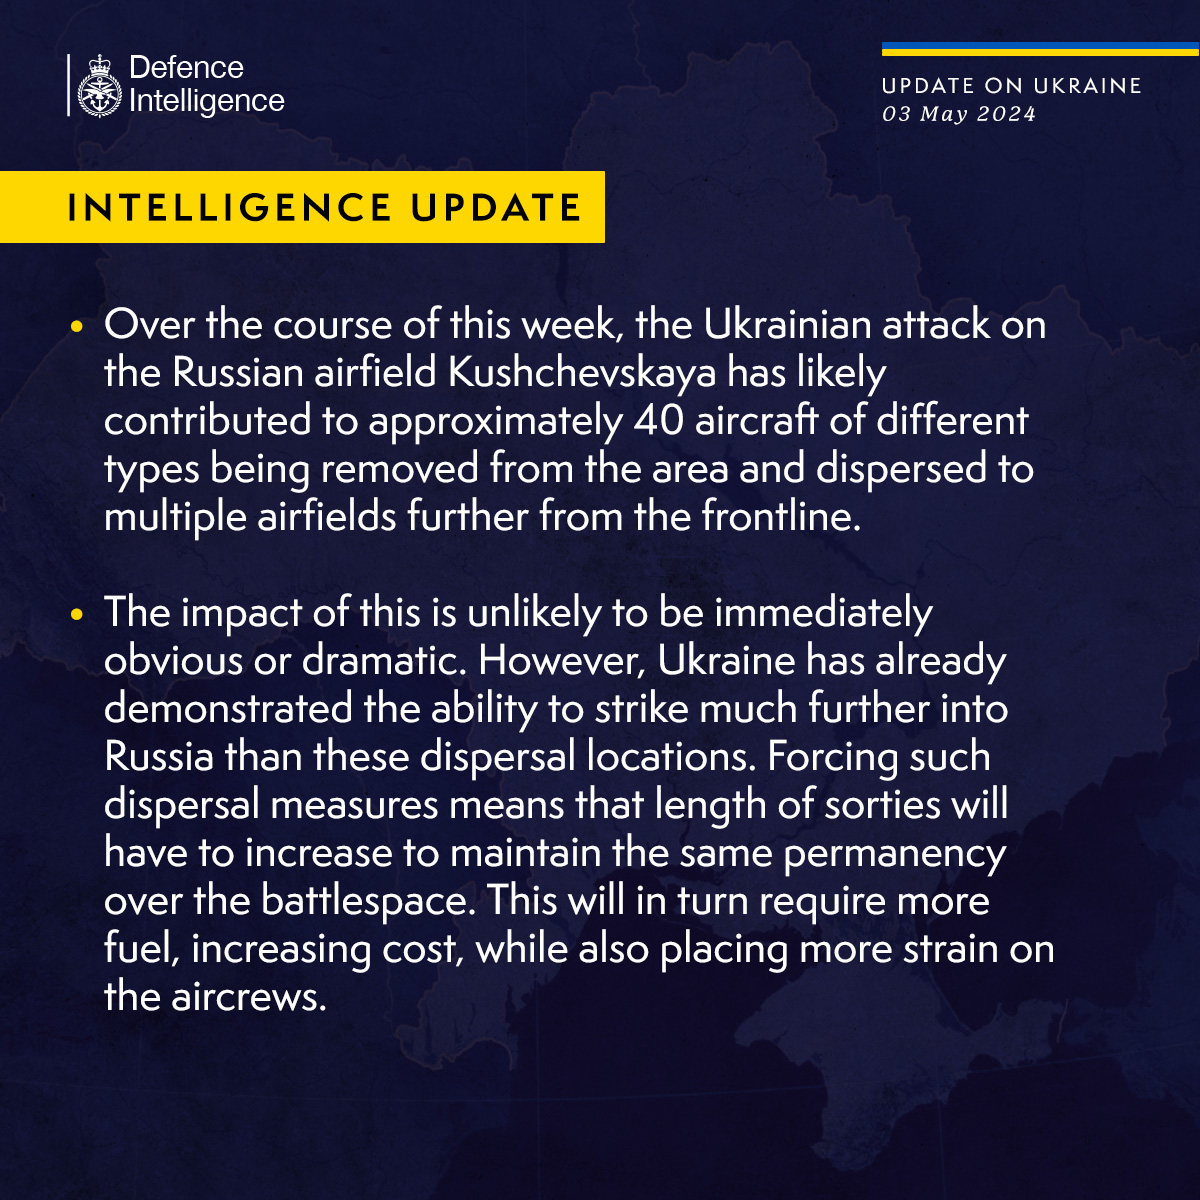 Latest Defence Intelligence update on the situation in Ukraine – 03 May 2024. Find out more about Defence Intelligence's use of language: ow.ly/enhY50Rqov8 #StandWithUkraine 🇺🇦